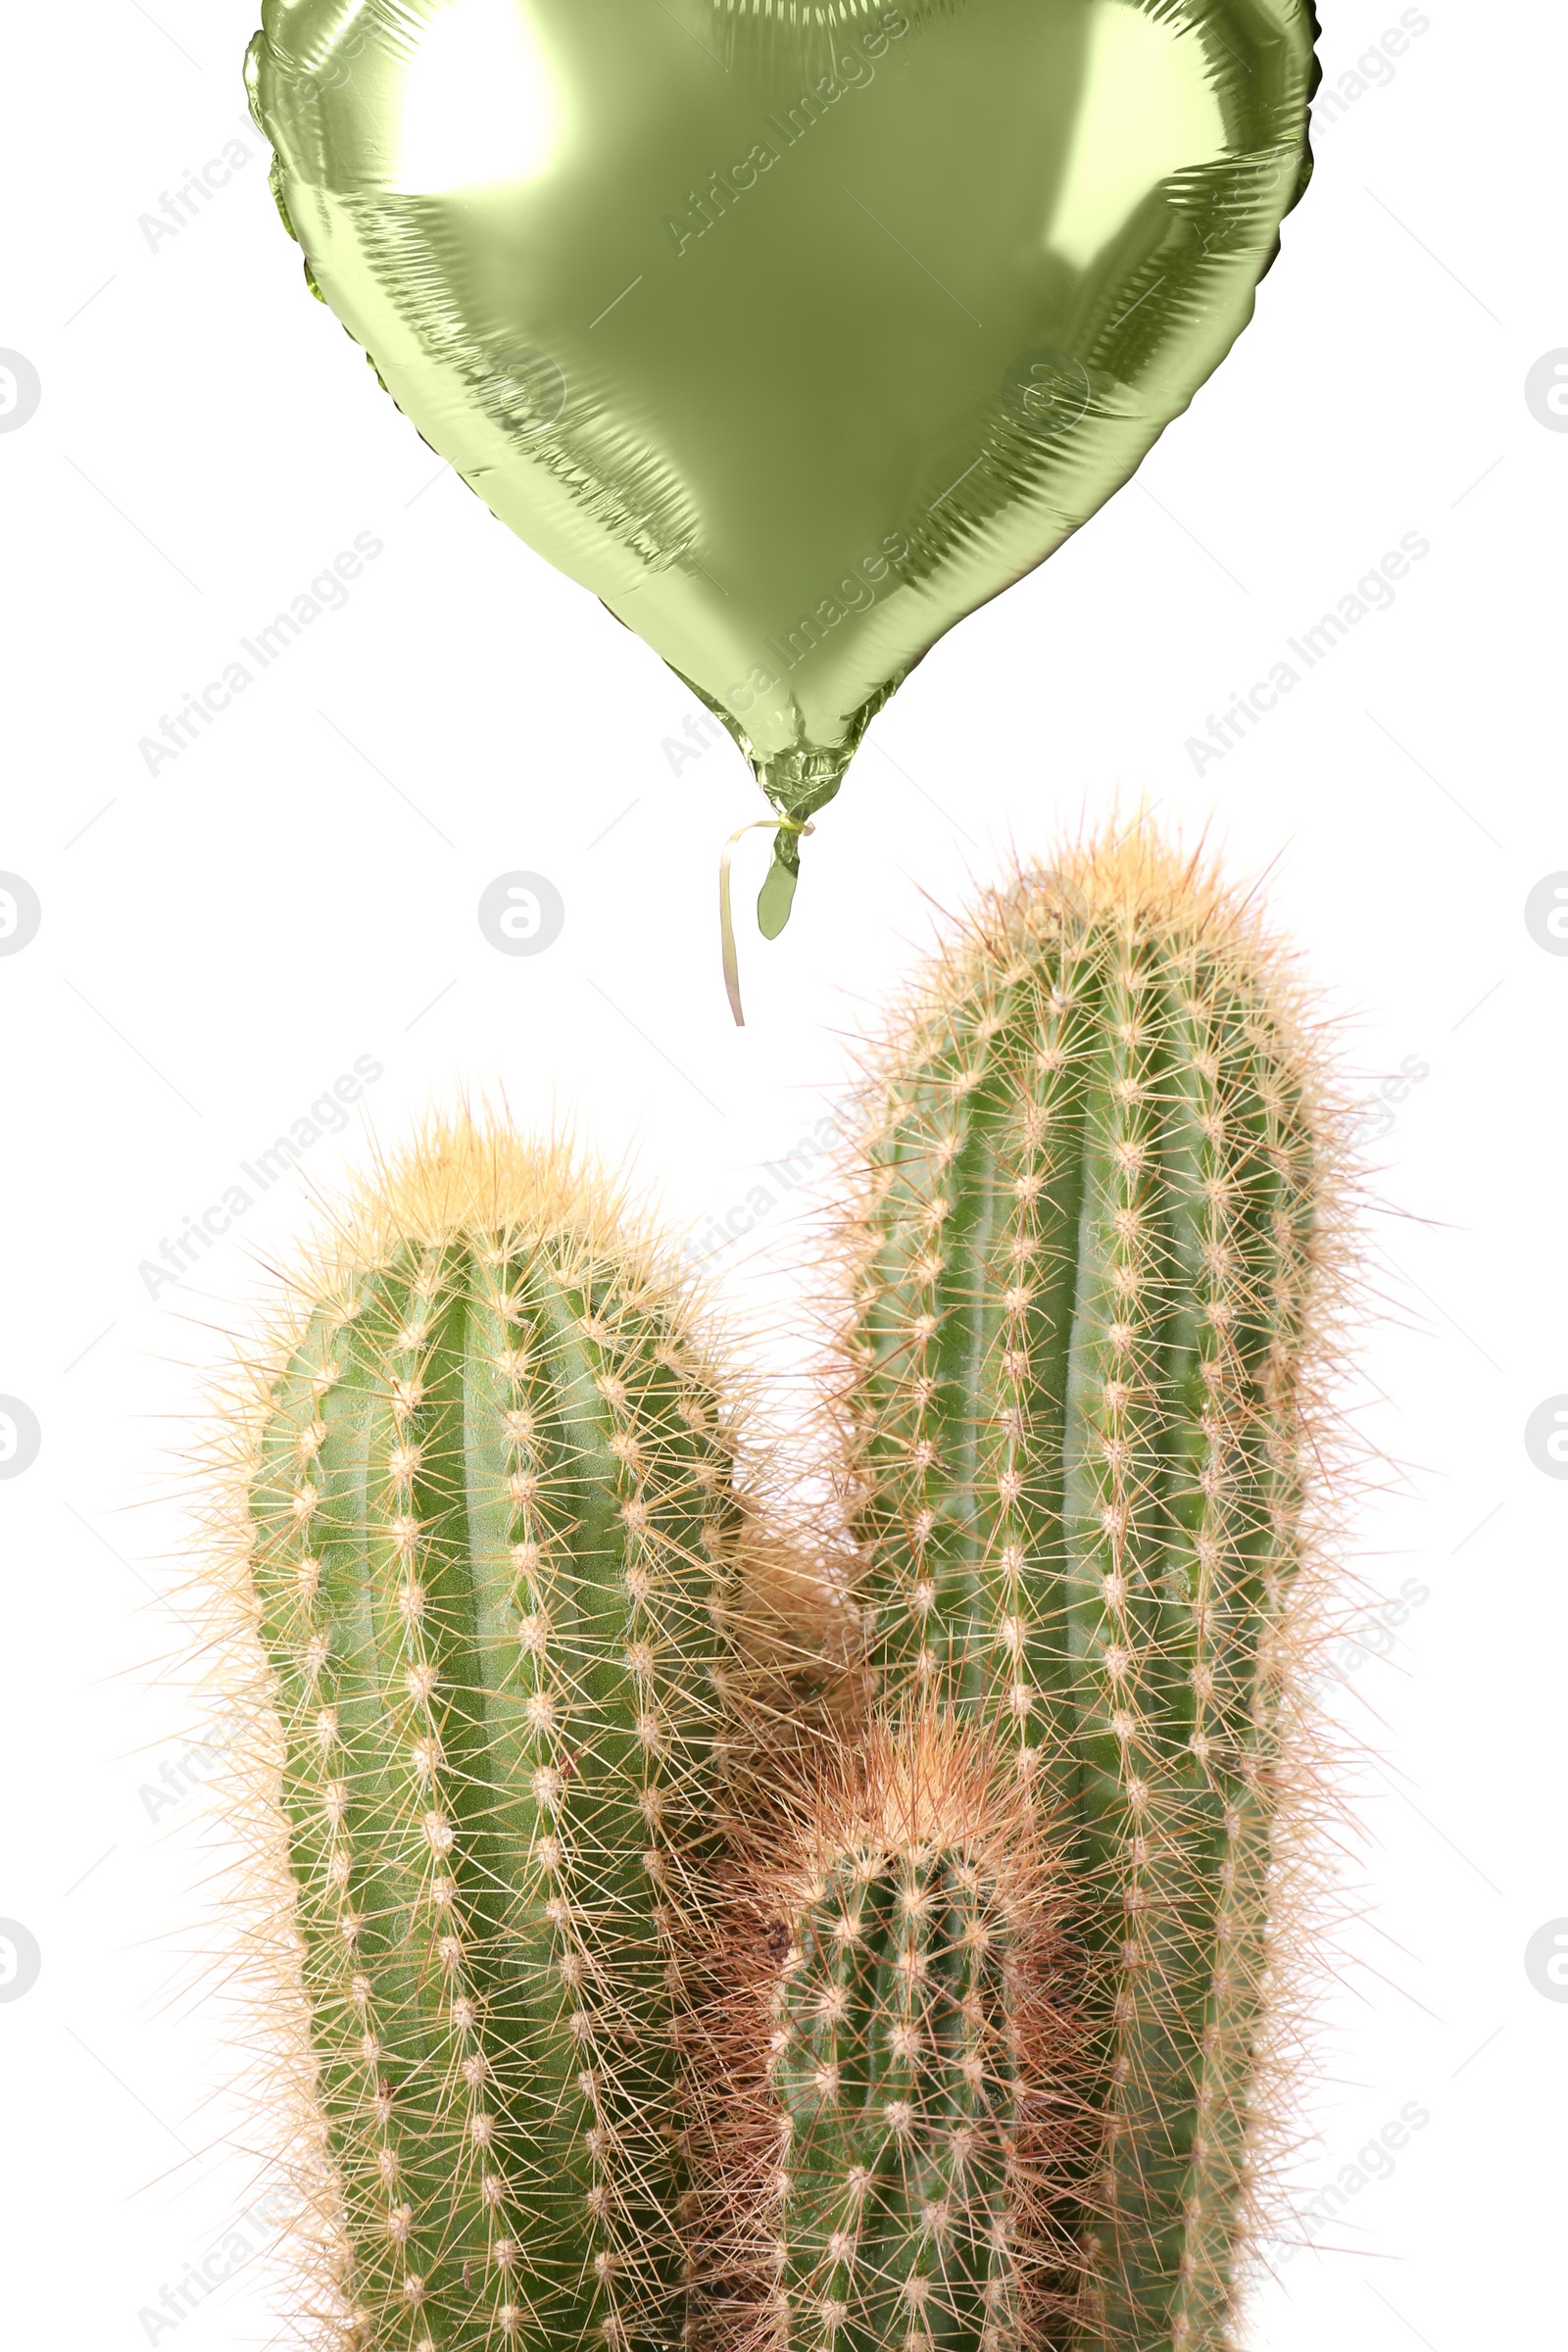 Image of Green balloon over cacti on white background